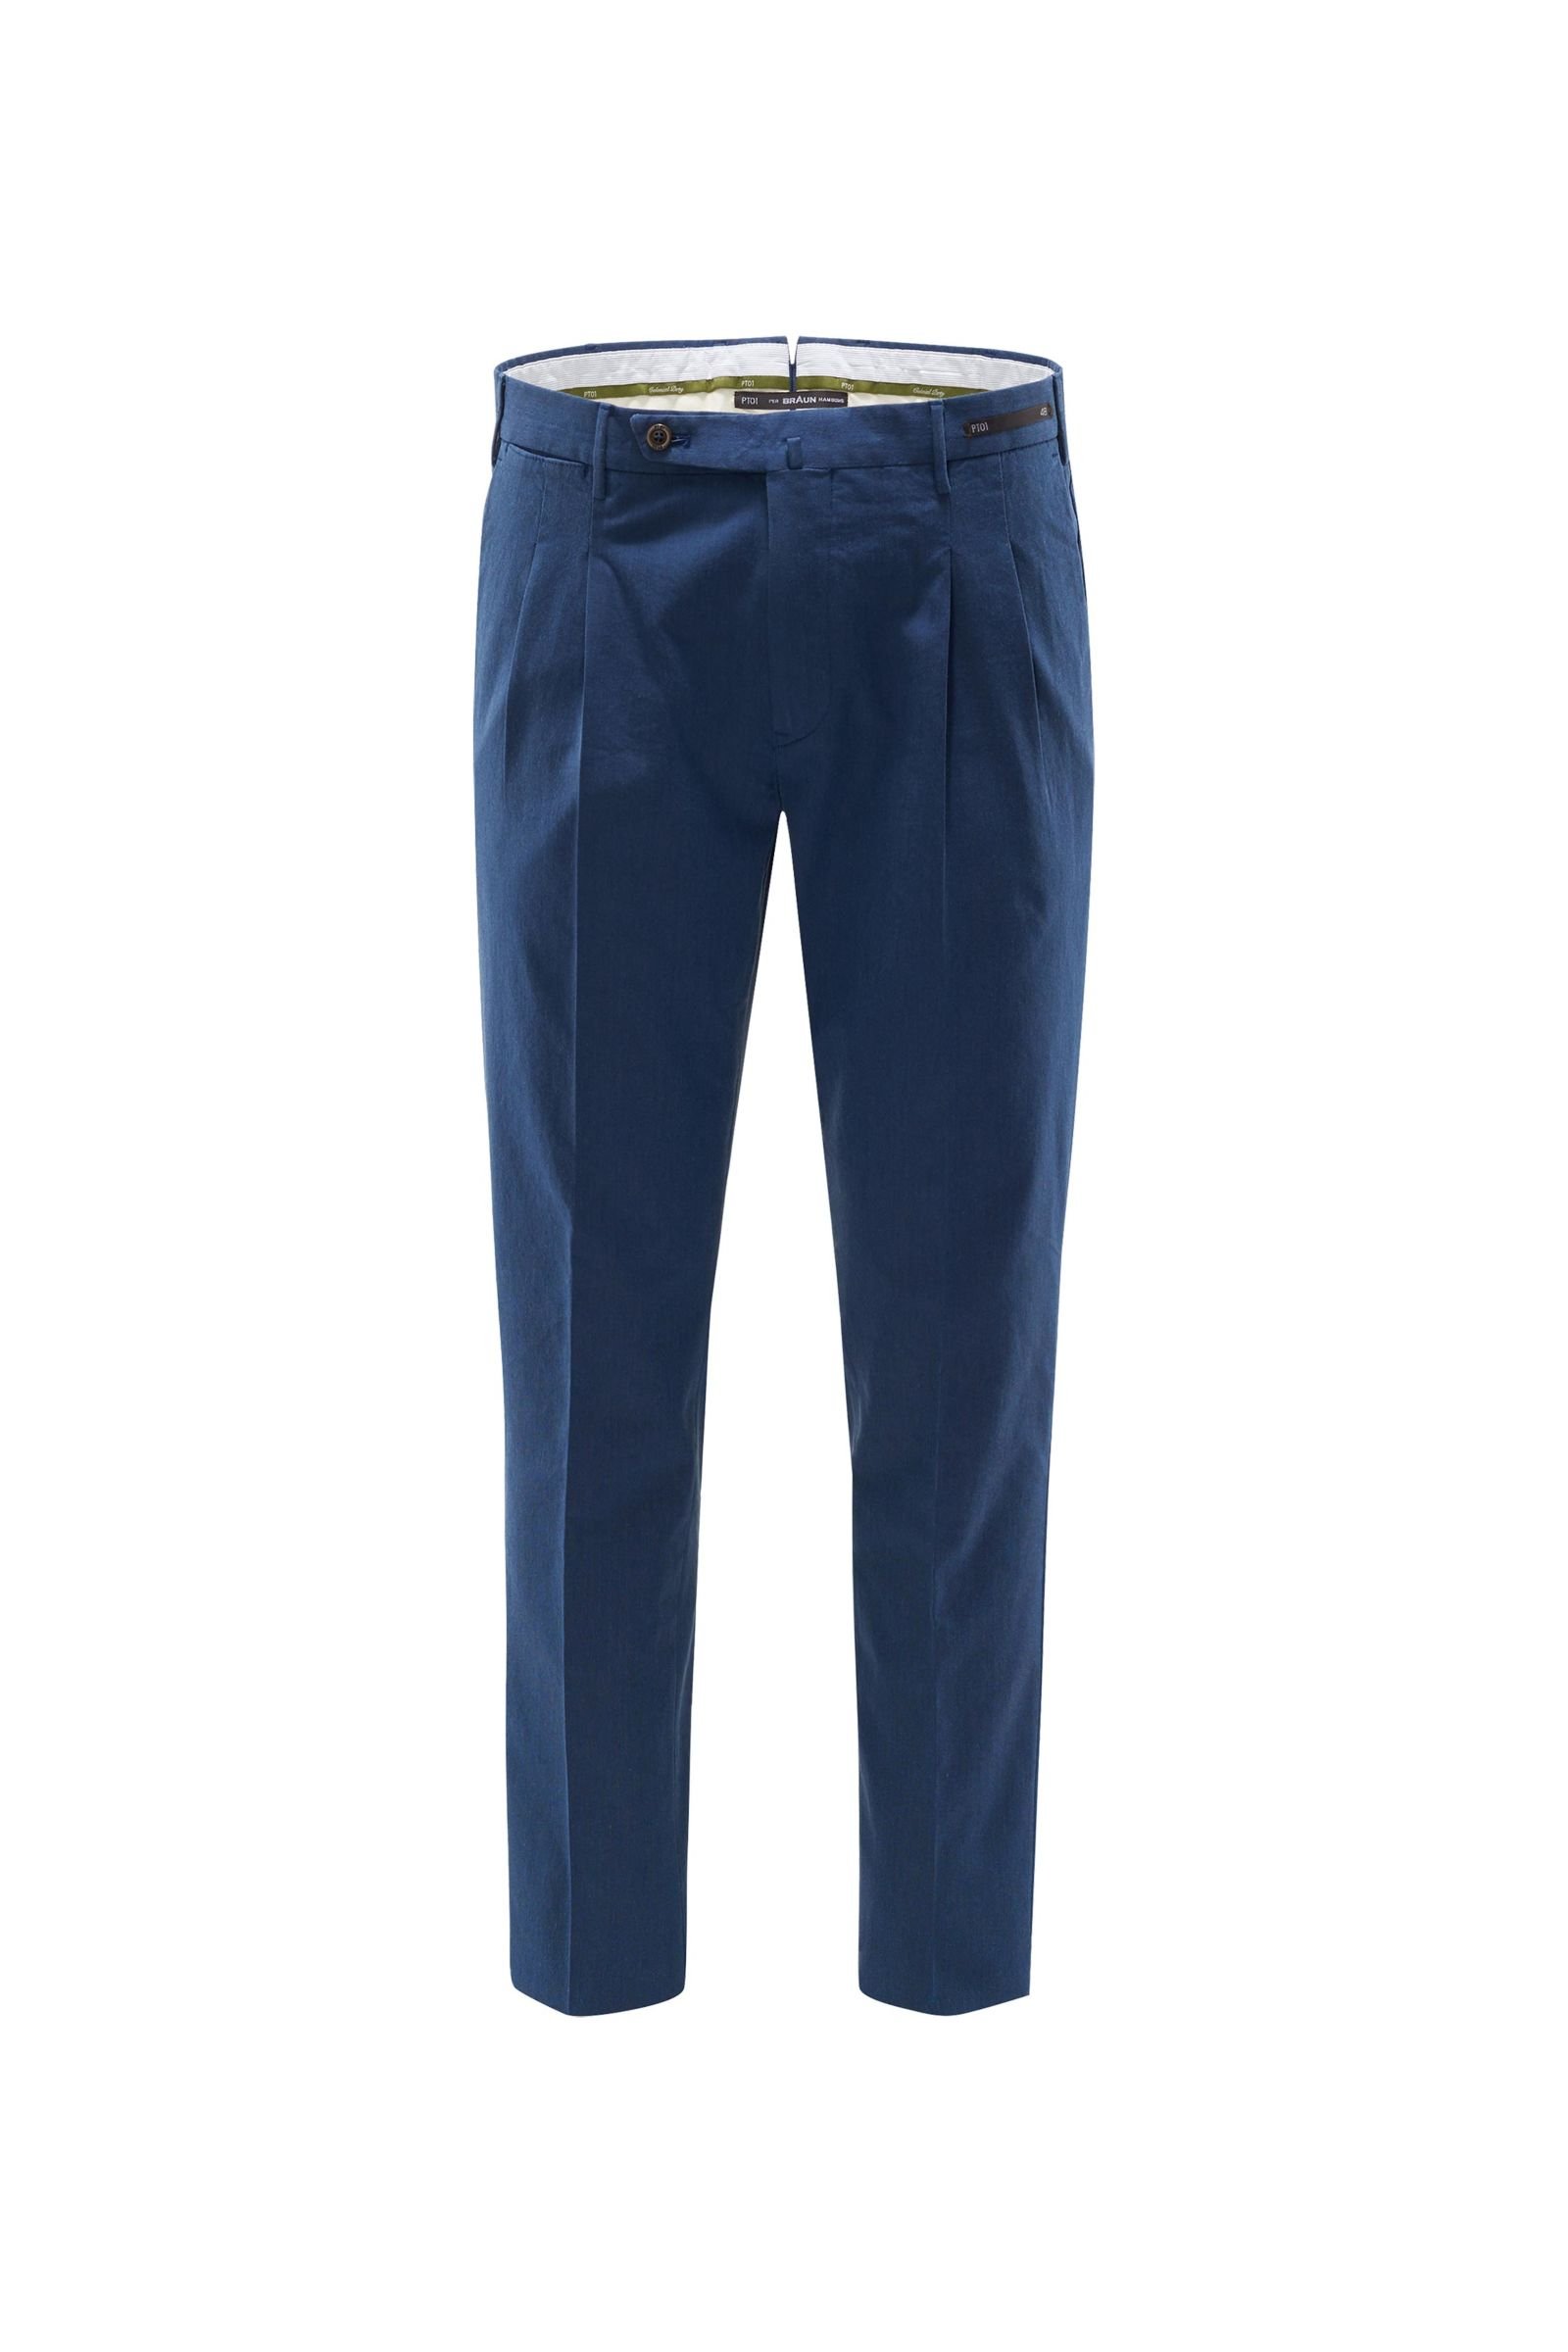 Chambray trousers 'Colonial Party Bombay Hills Preppy Fit' dark blue